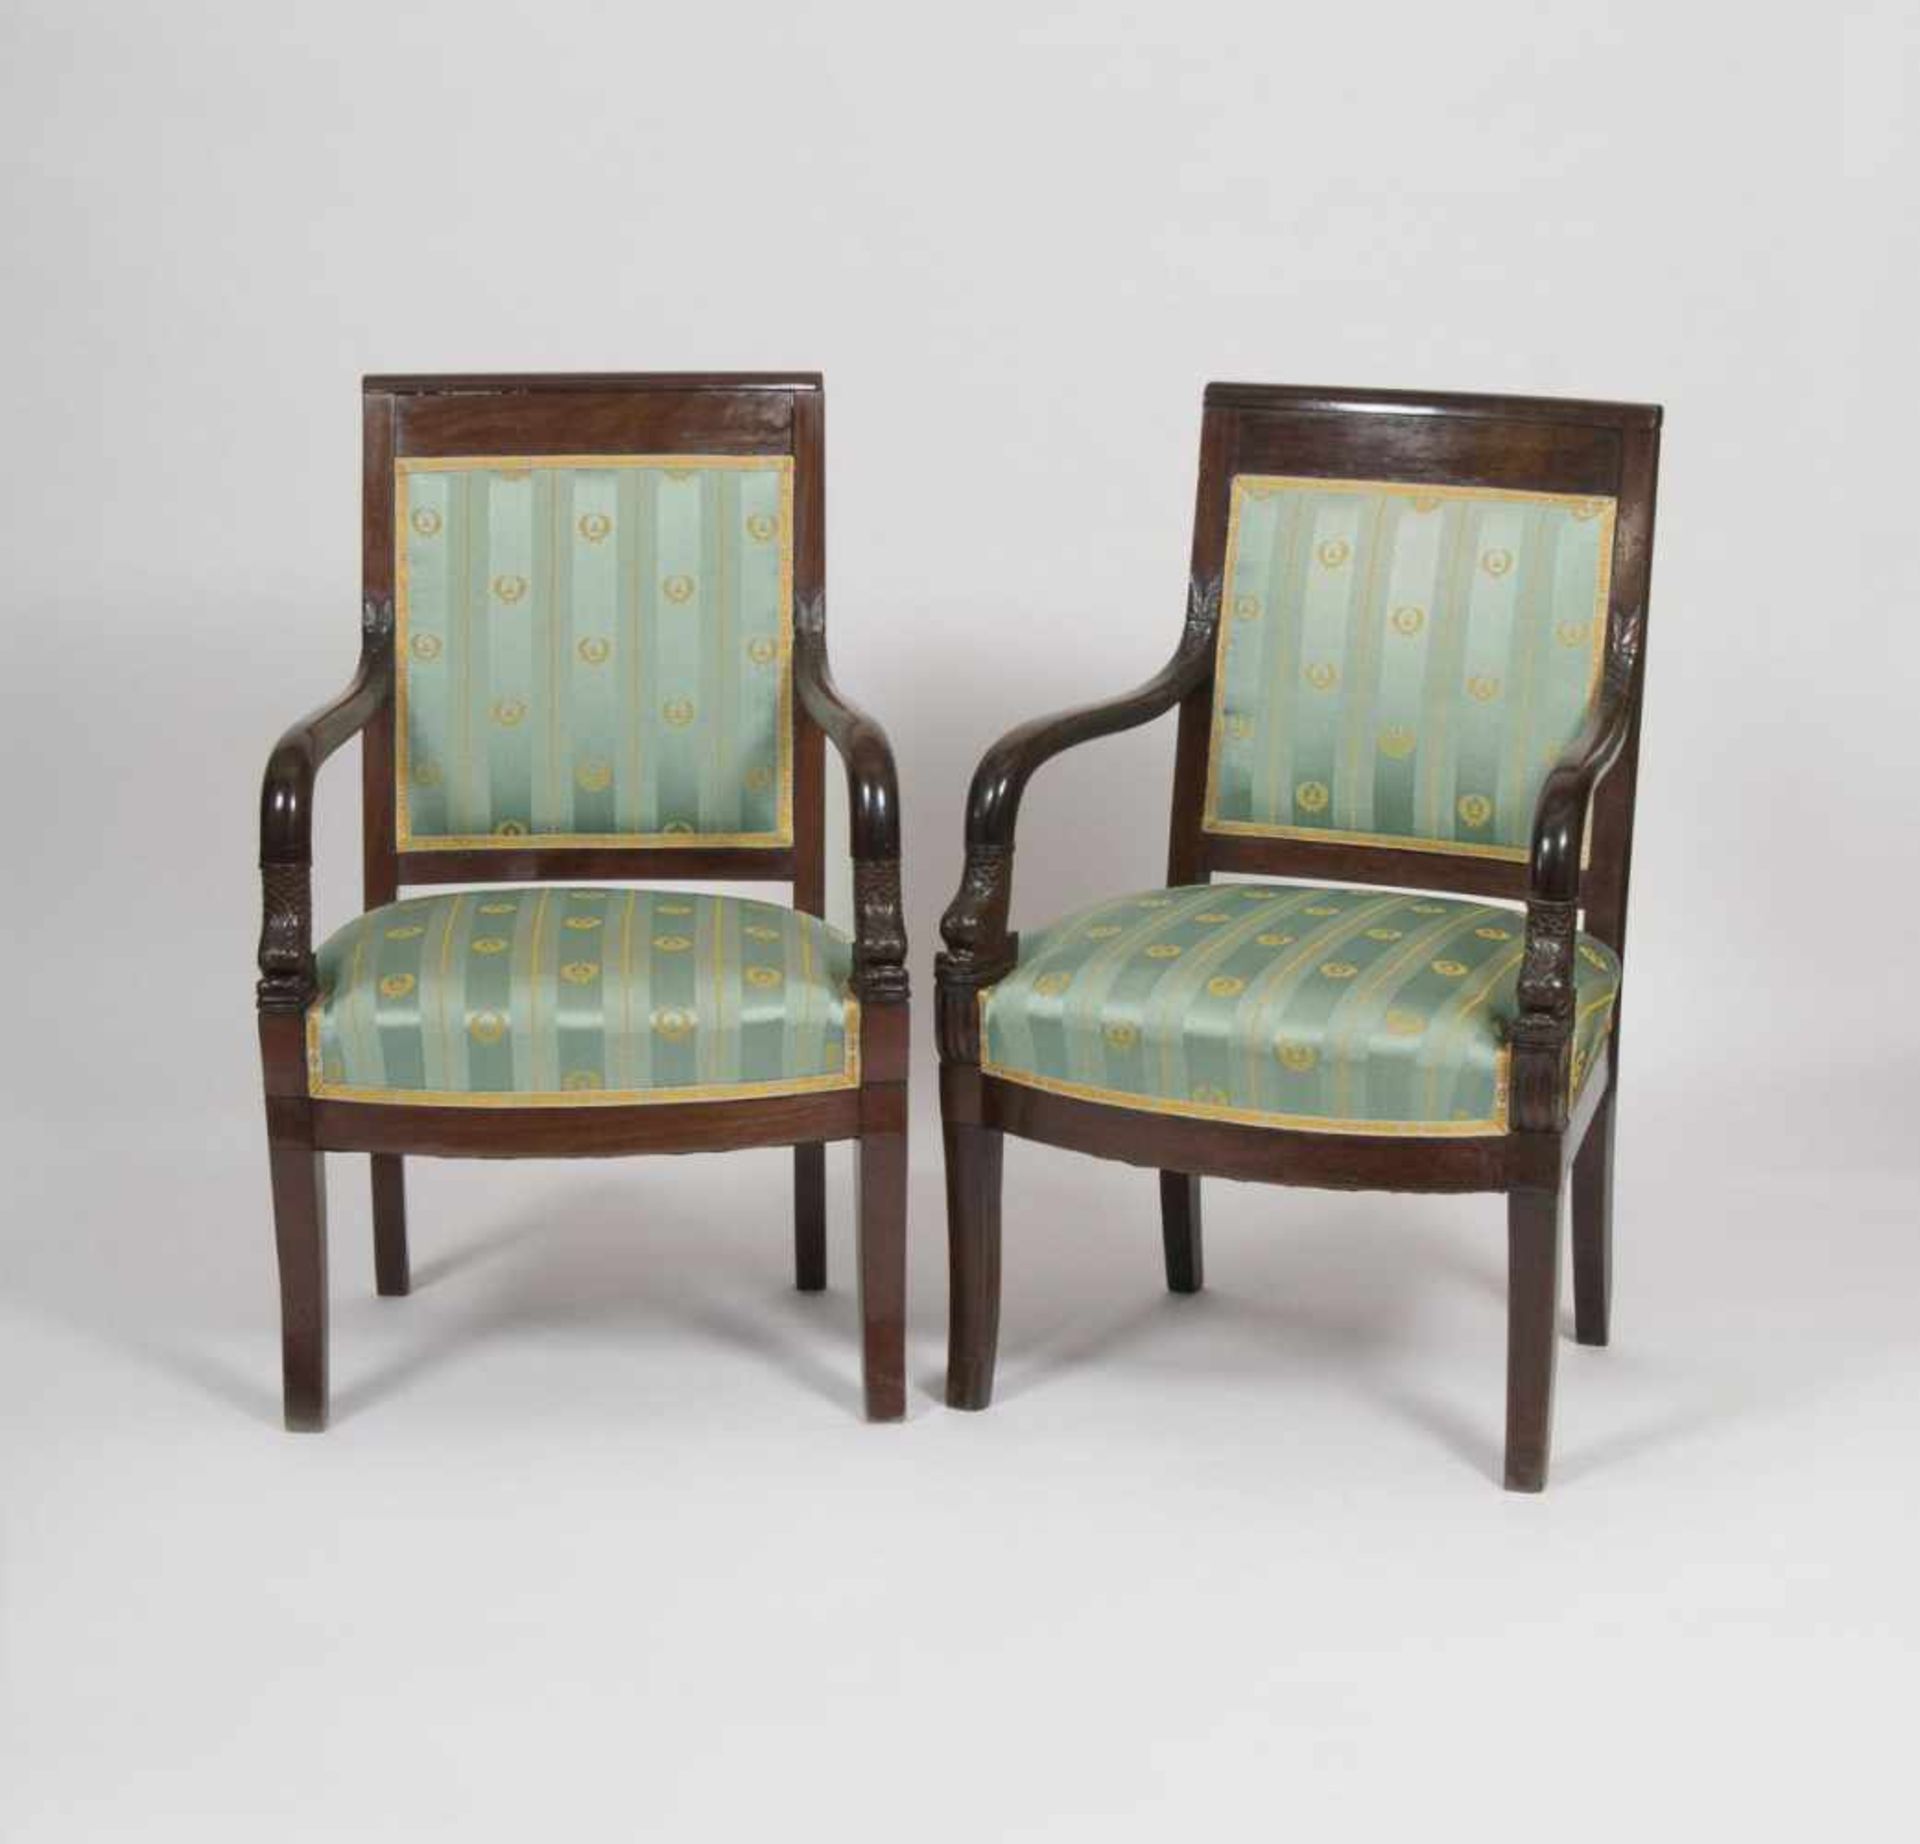 A Pair of Charles X. Armchairs with Dolphin DecorFrance, around 1830. Veneered mahogany. Curved